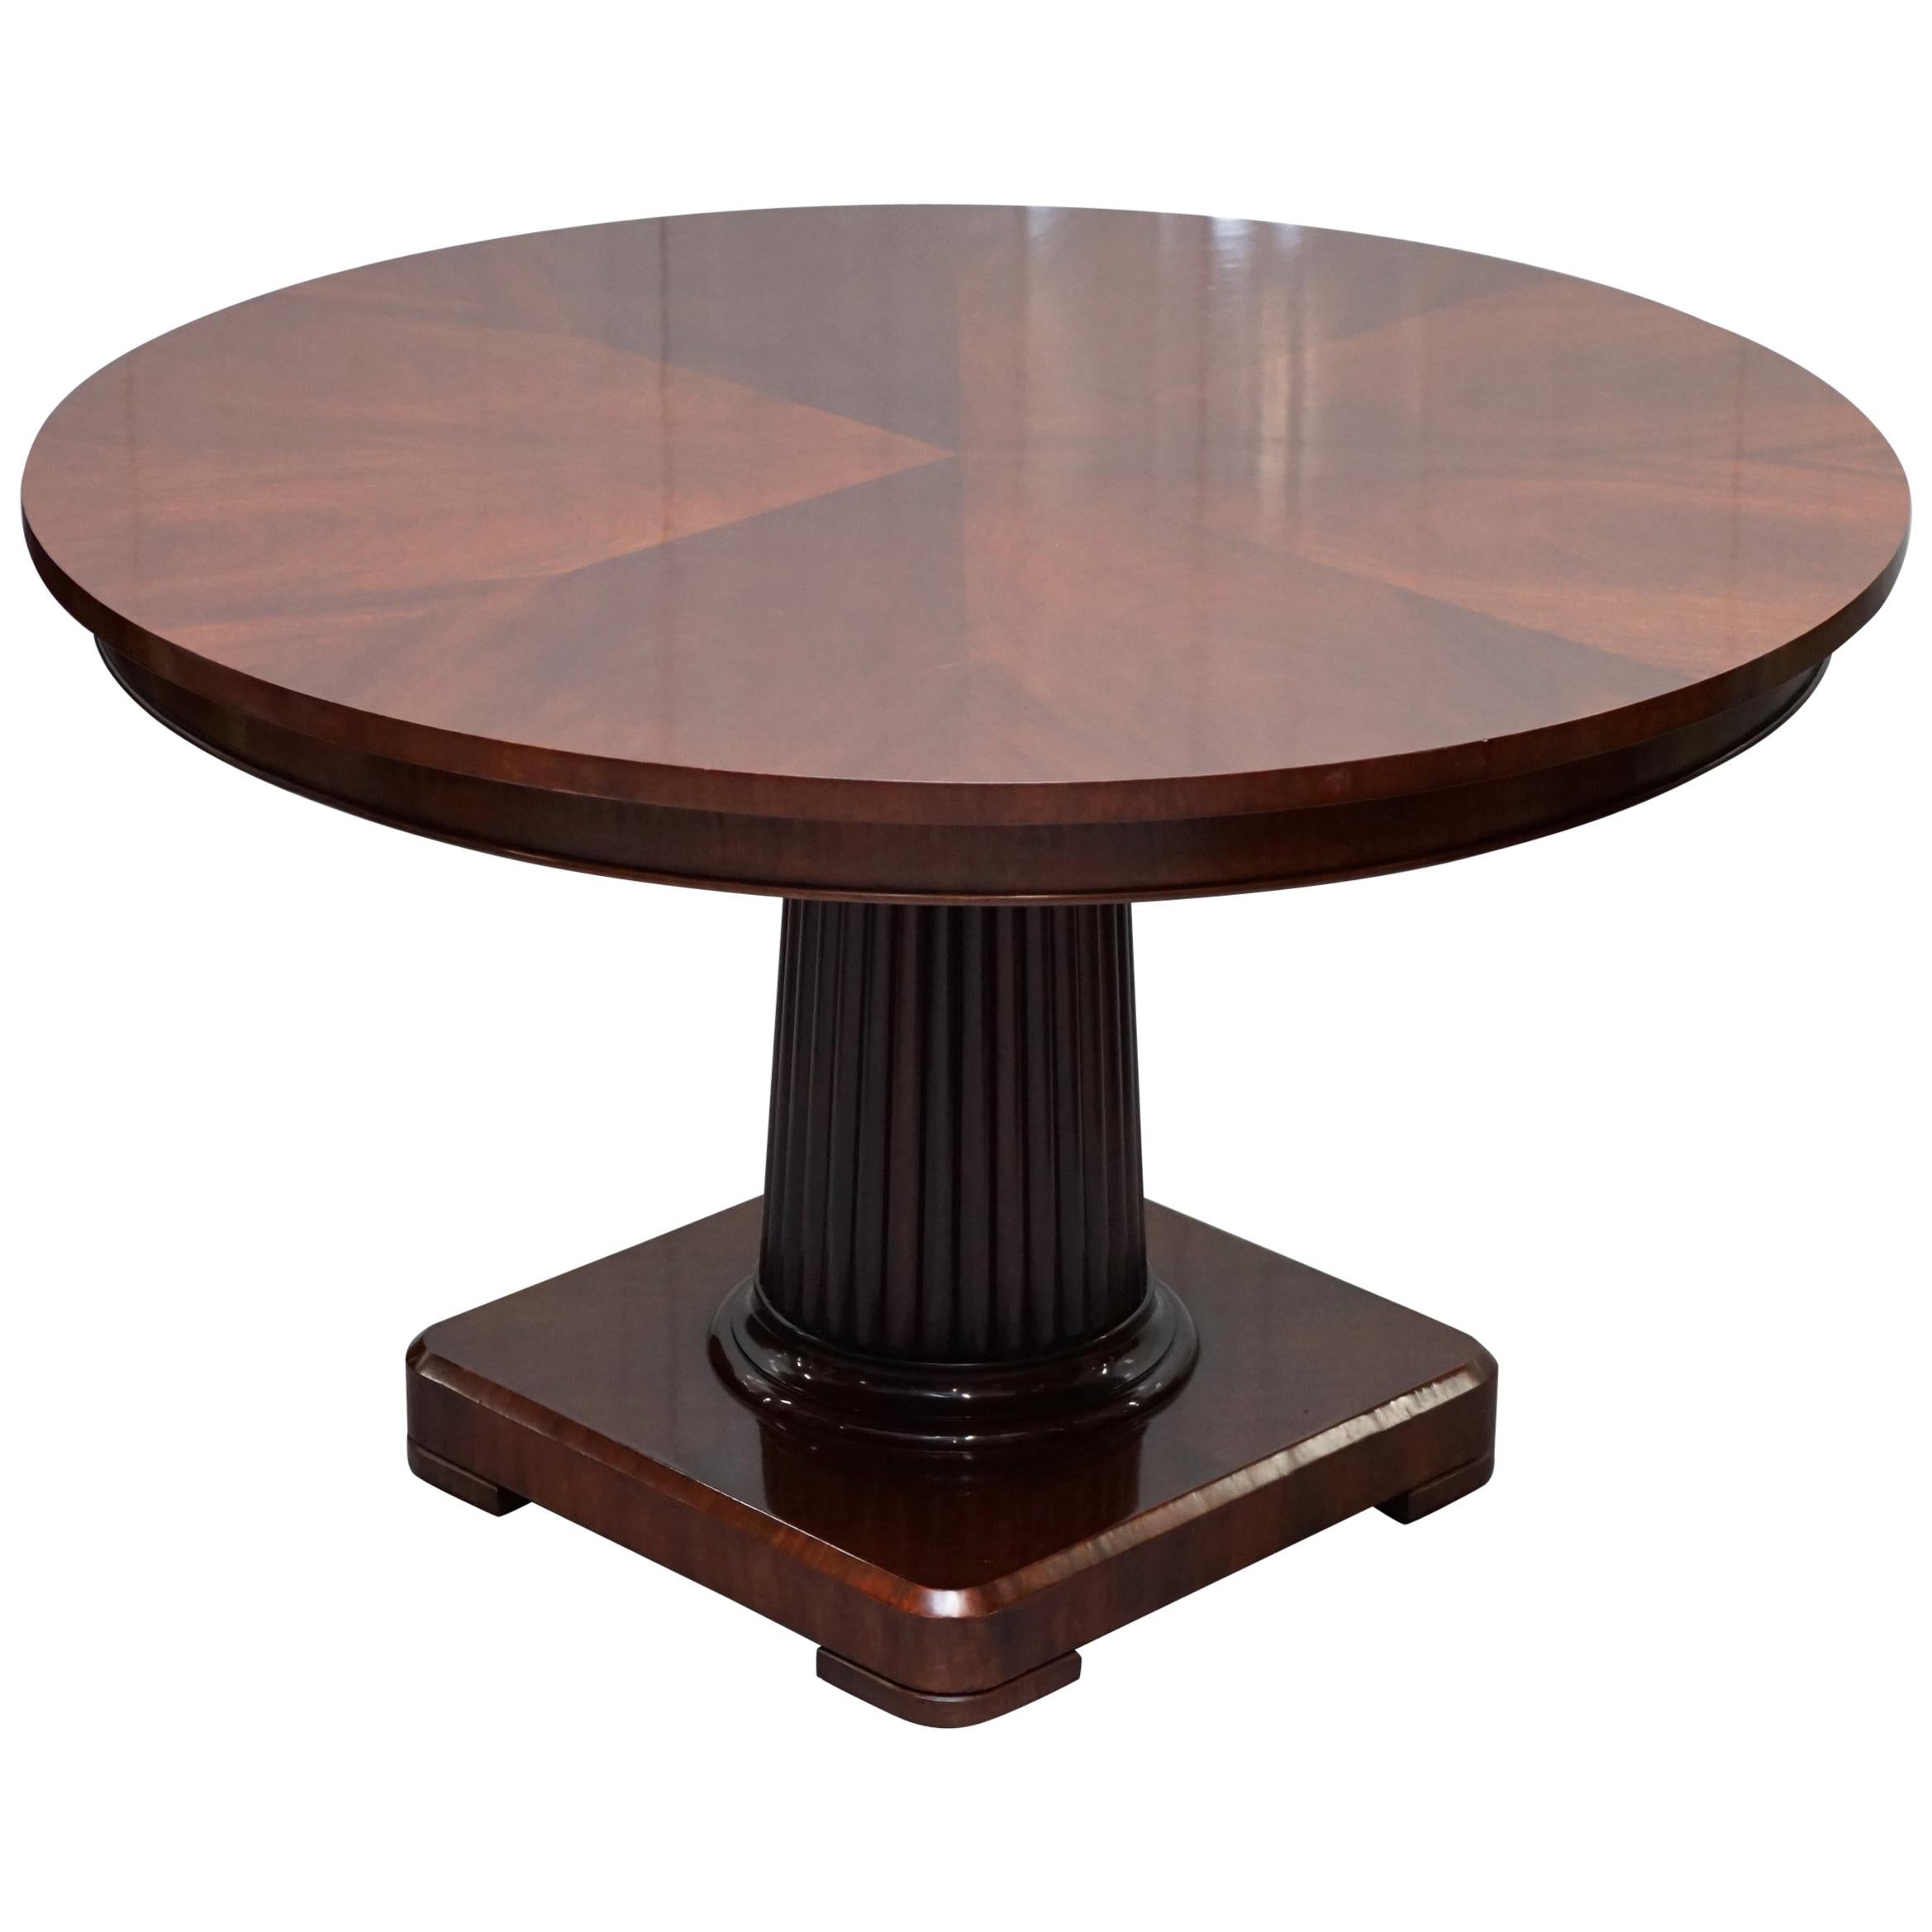 Ralph Lauren Mayfair Mahogany Centre Dining Occasional Round Table